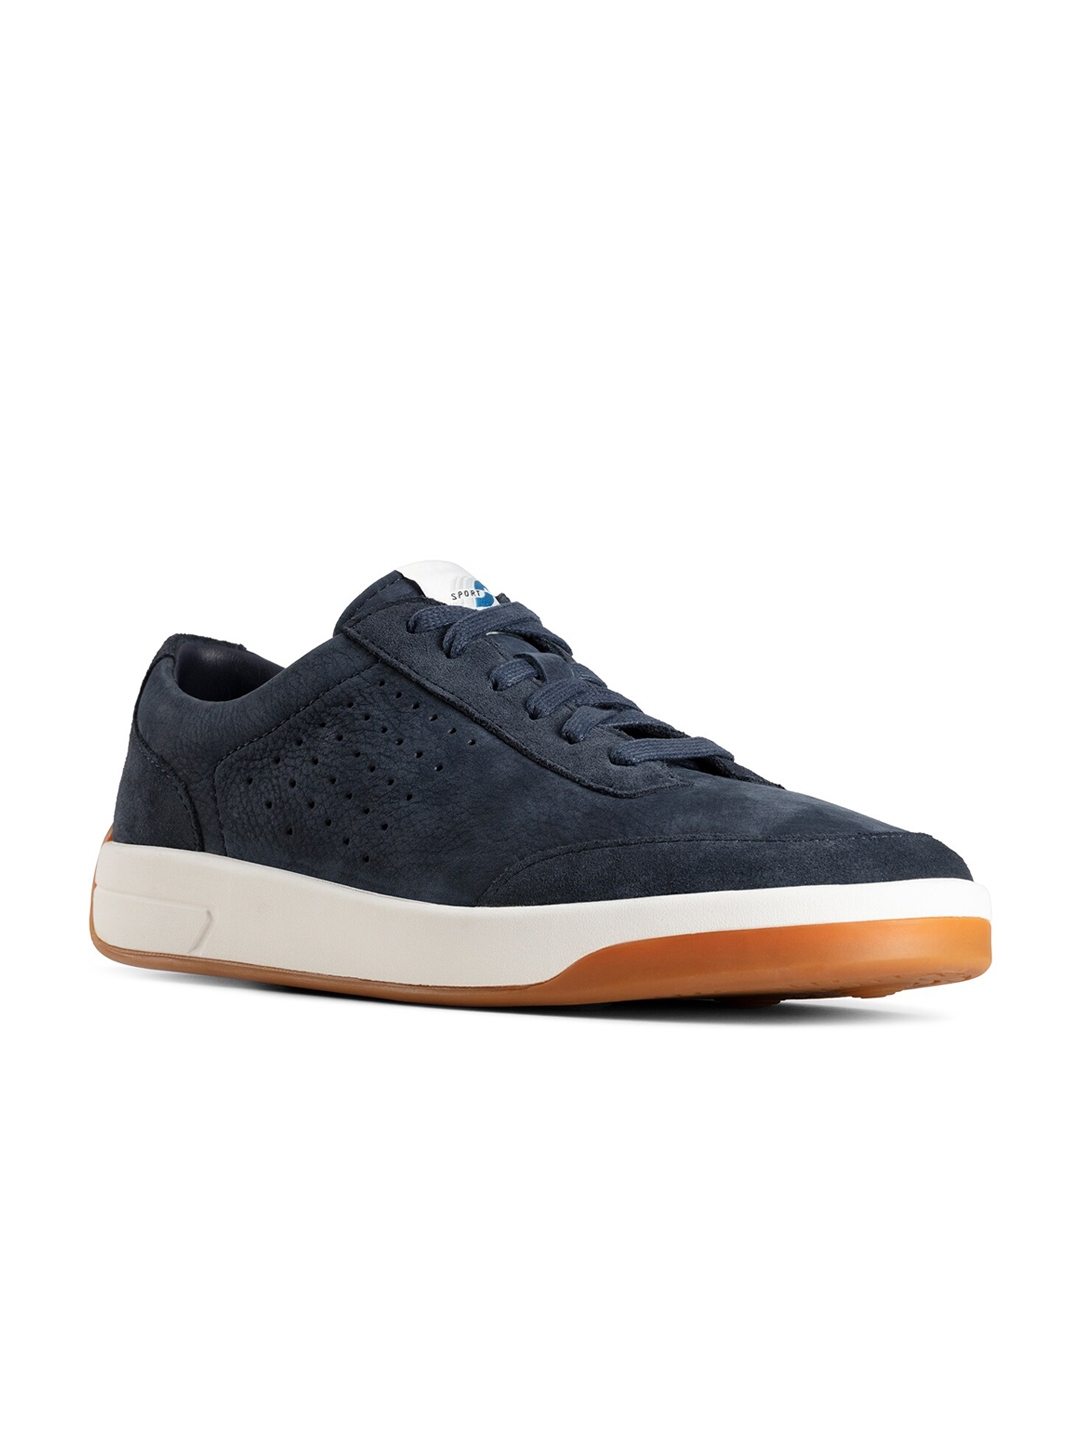 Buy Clarks Men Navy Blue Leather Sneakers - Casual Shoes for Men ...